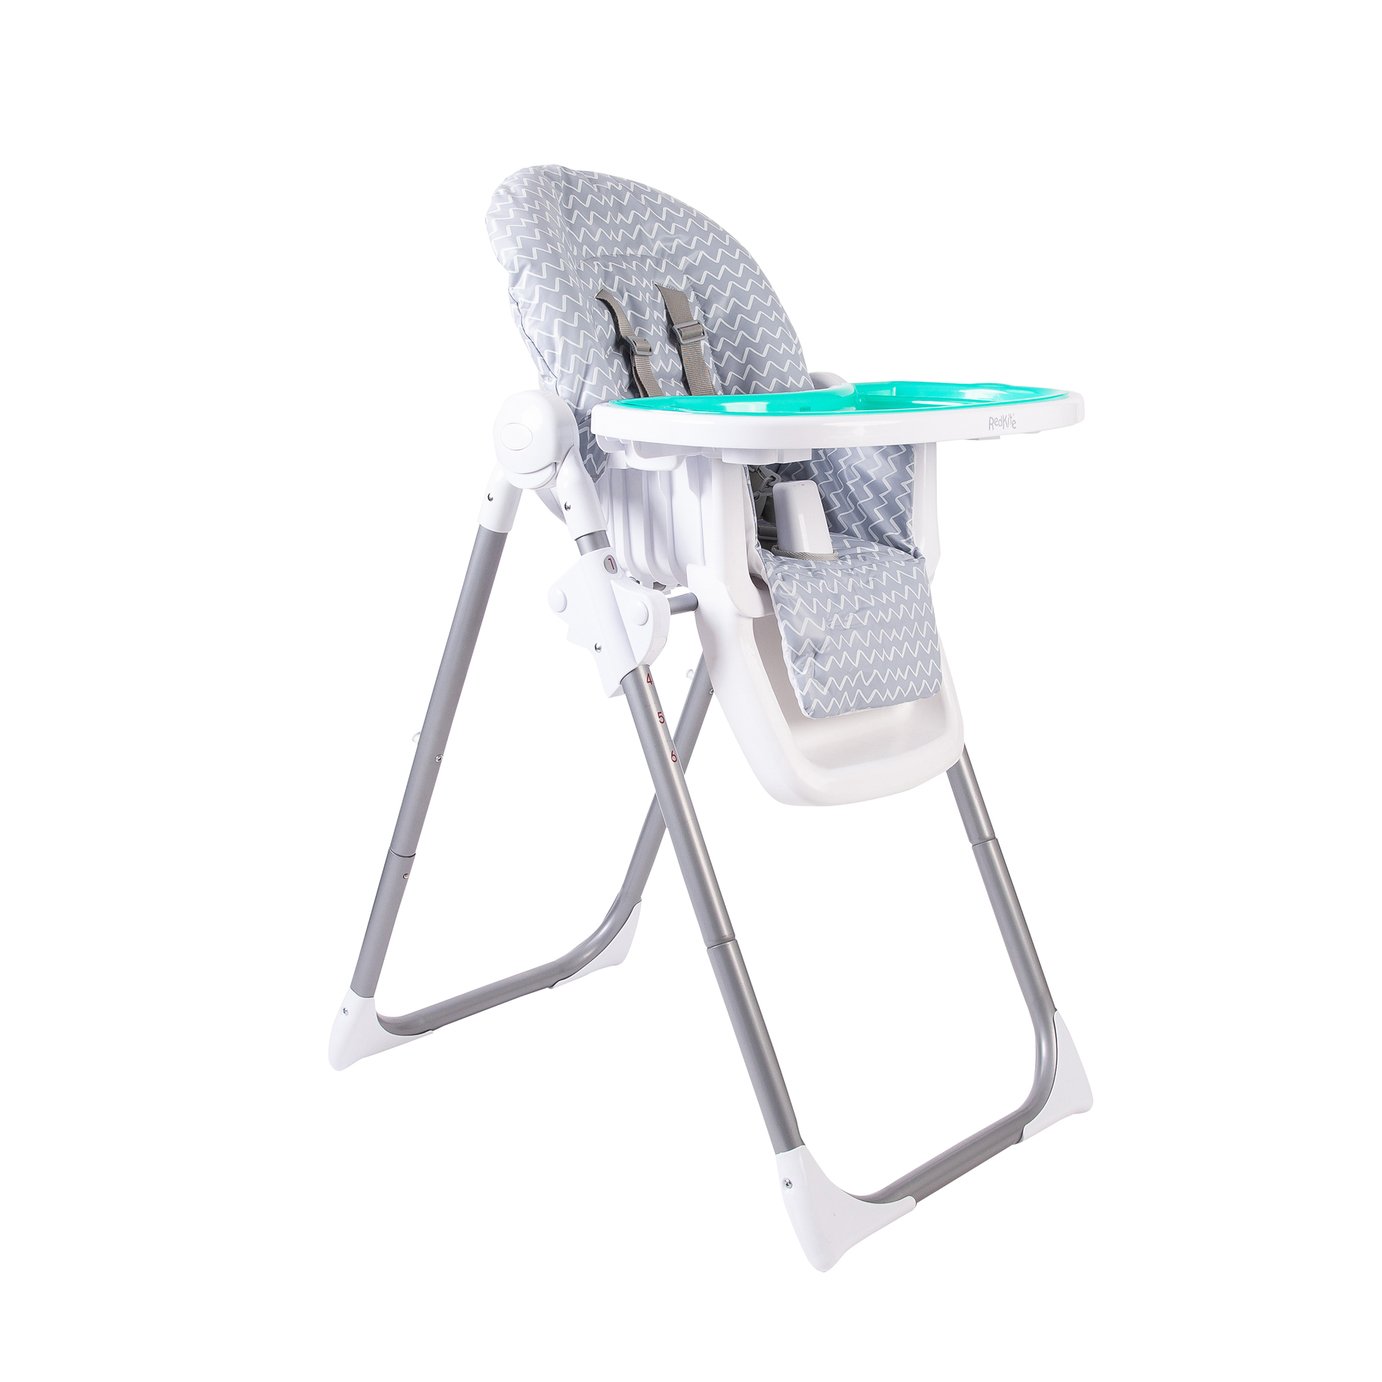 Feed Me Deli Peppermint Trail Highchair Review